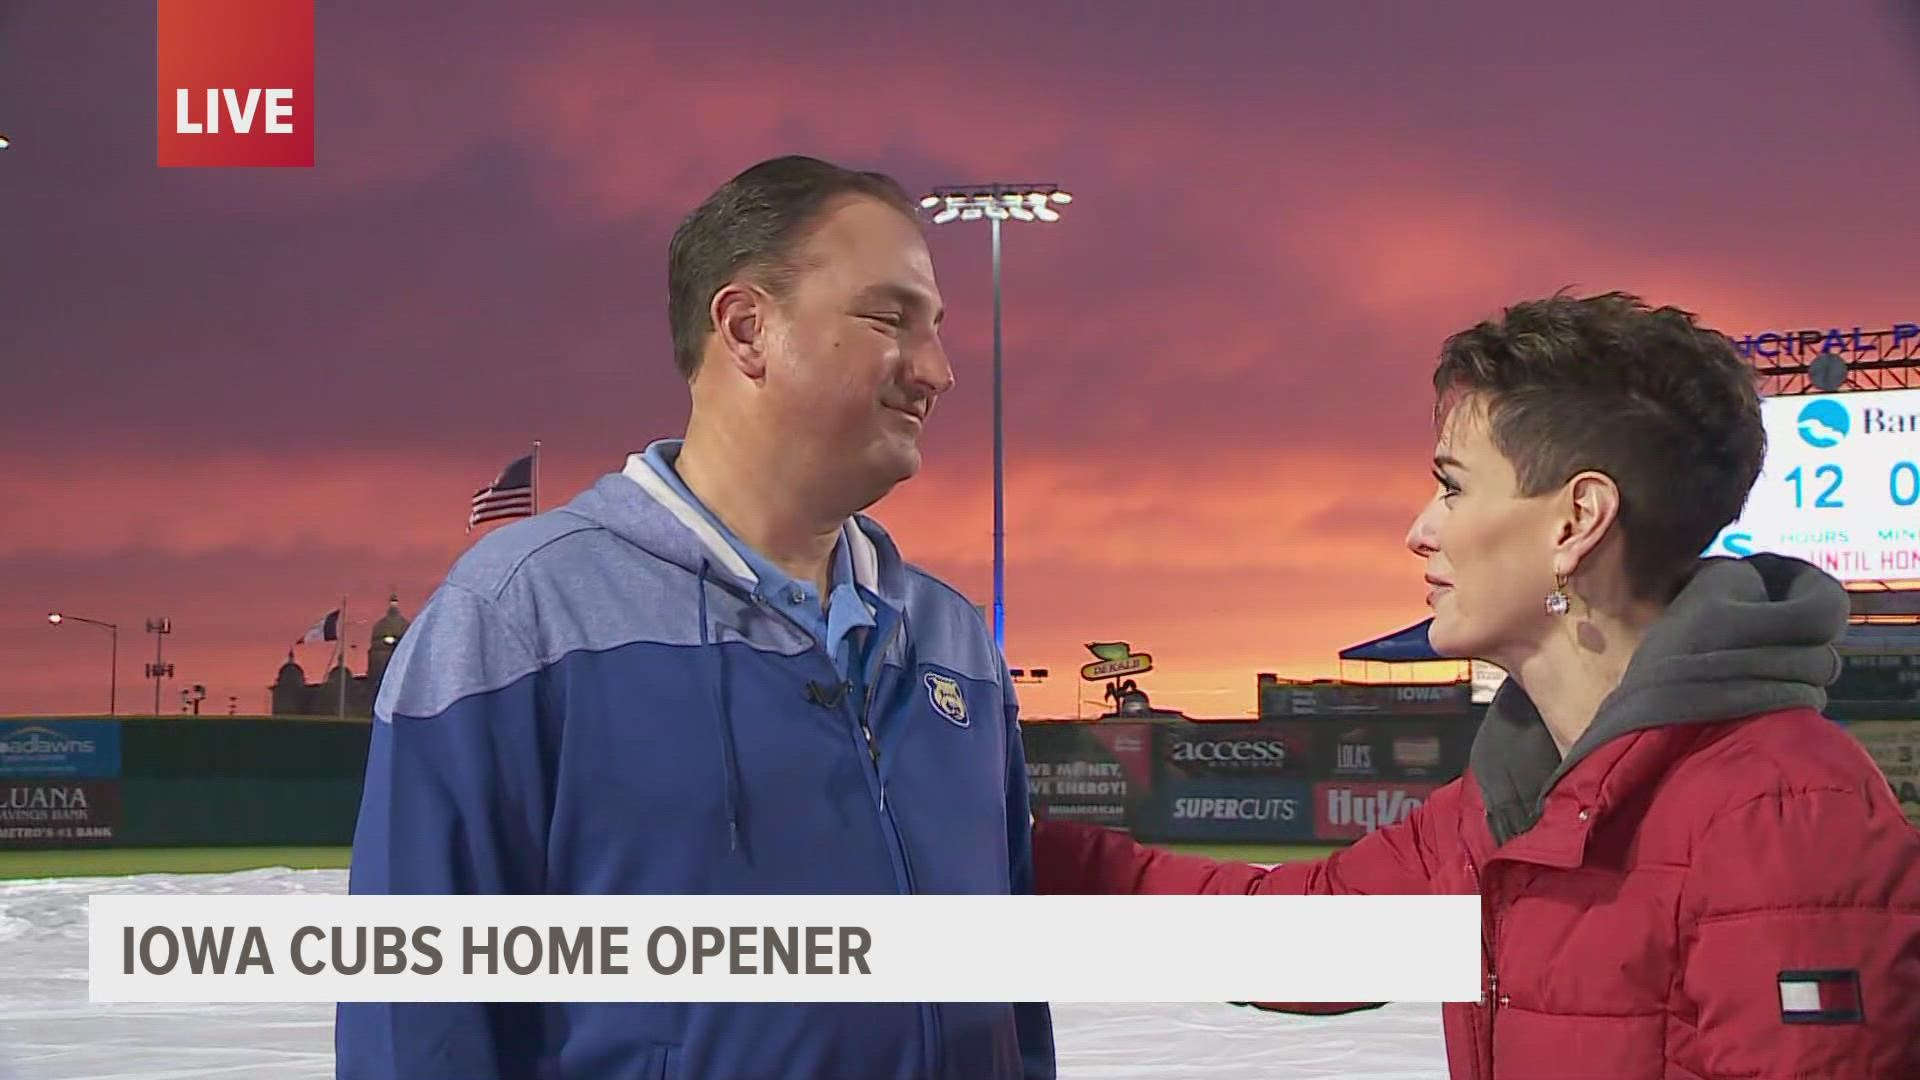 The Vice President for the Iowa Cubs tells Local 5 everything fans loved about Iowa Cubs will be the same and what happens if bad weather comes this way.